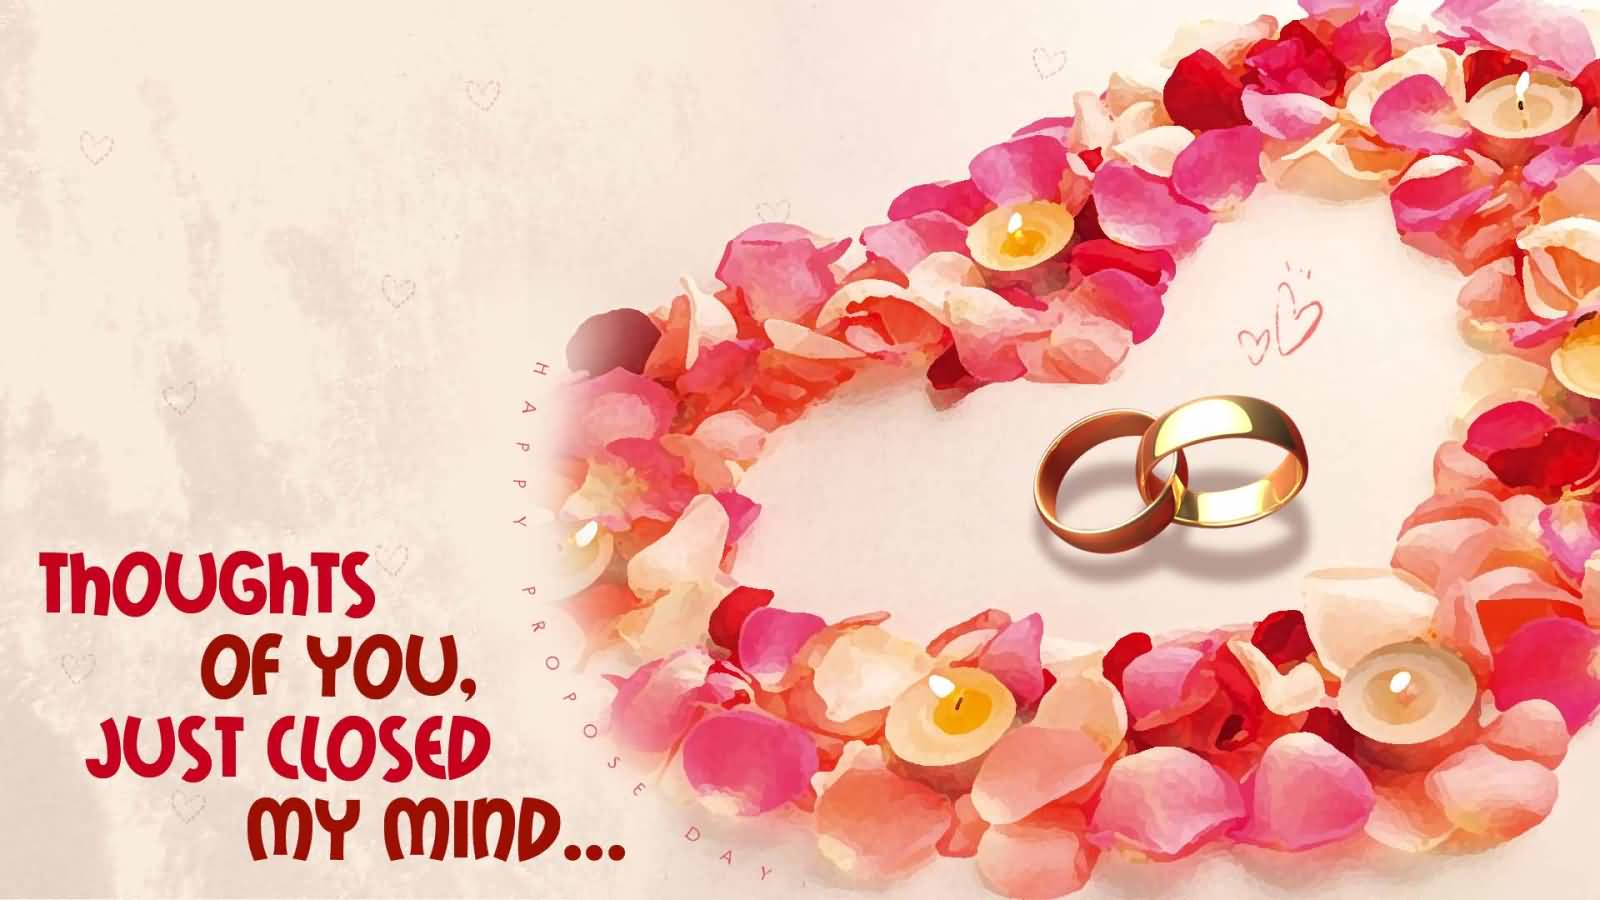 Thoughts Of You, Just Closed My Mind Happy Propose Day